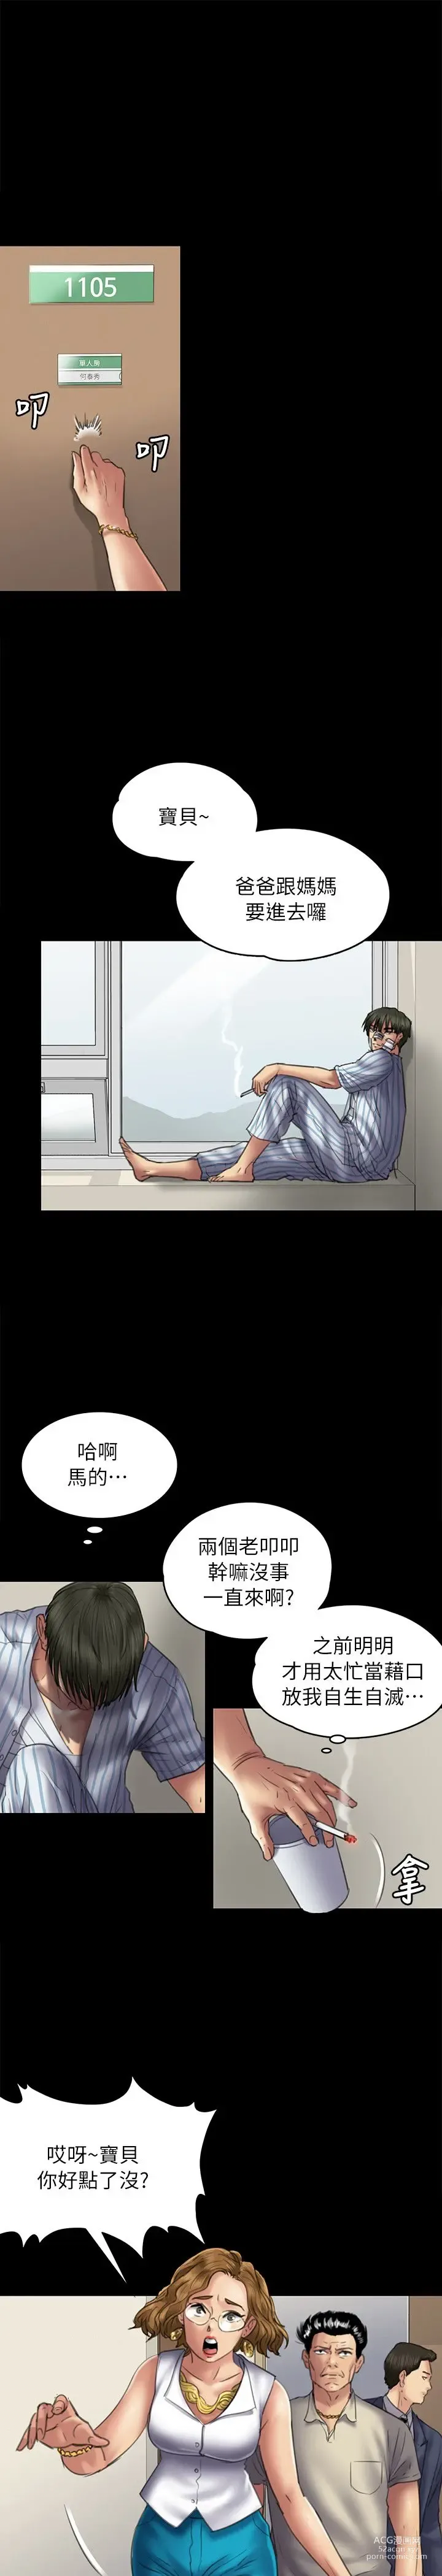 Page 36 of manga 傀儡 Queen Bee 51-100